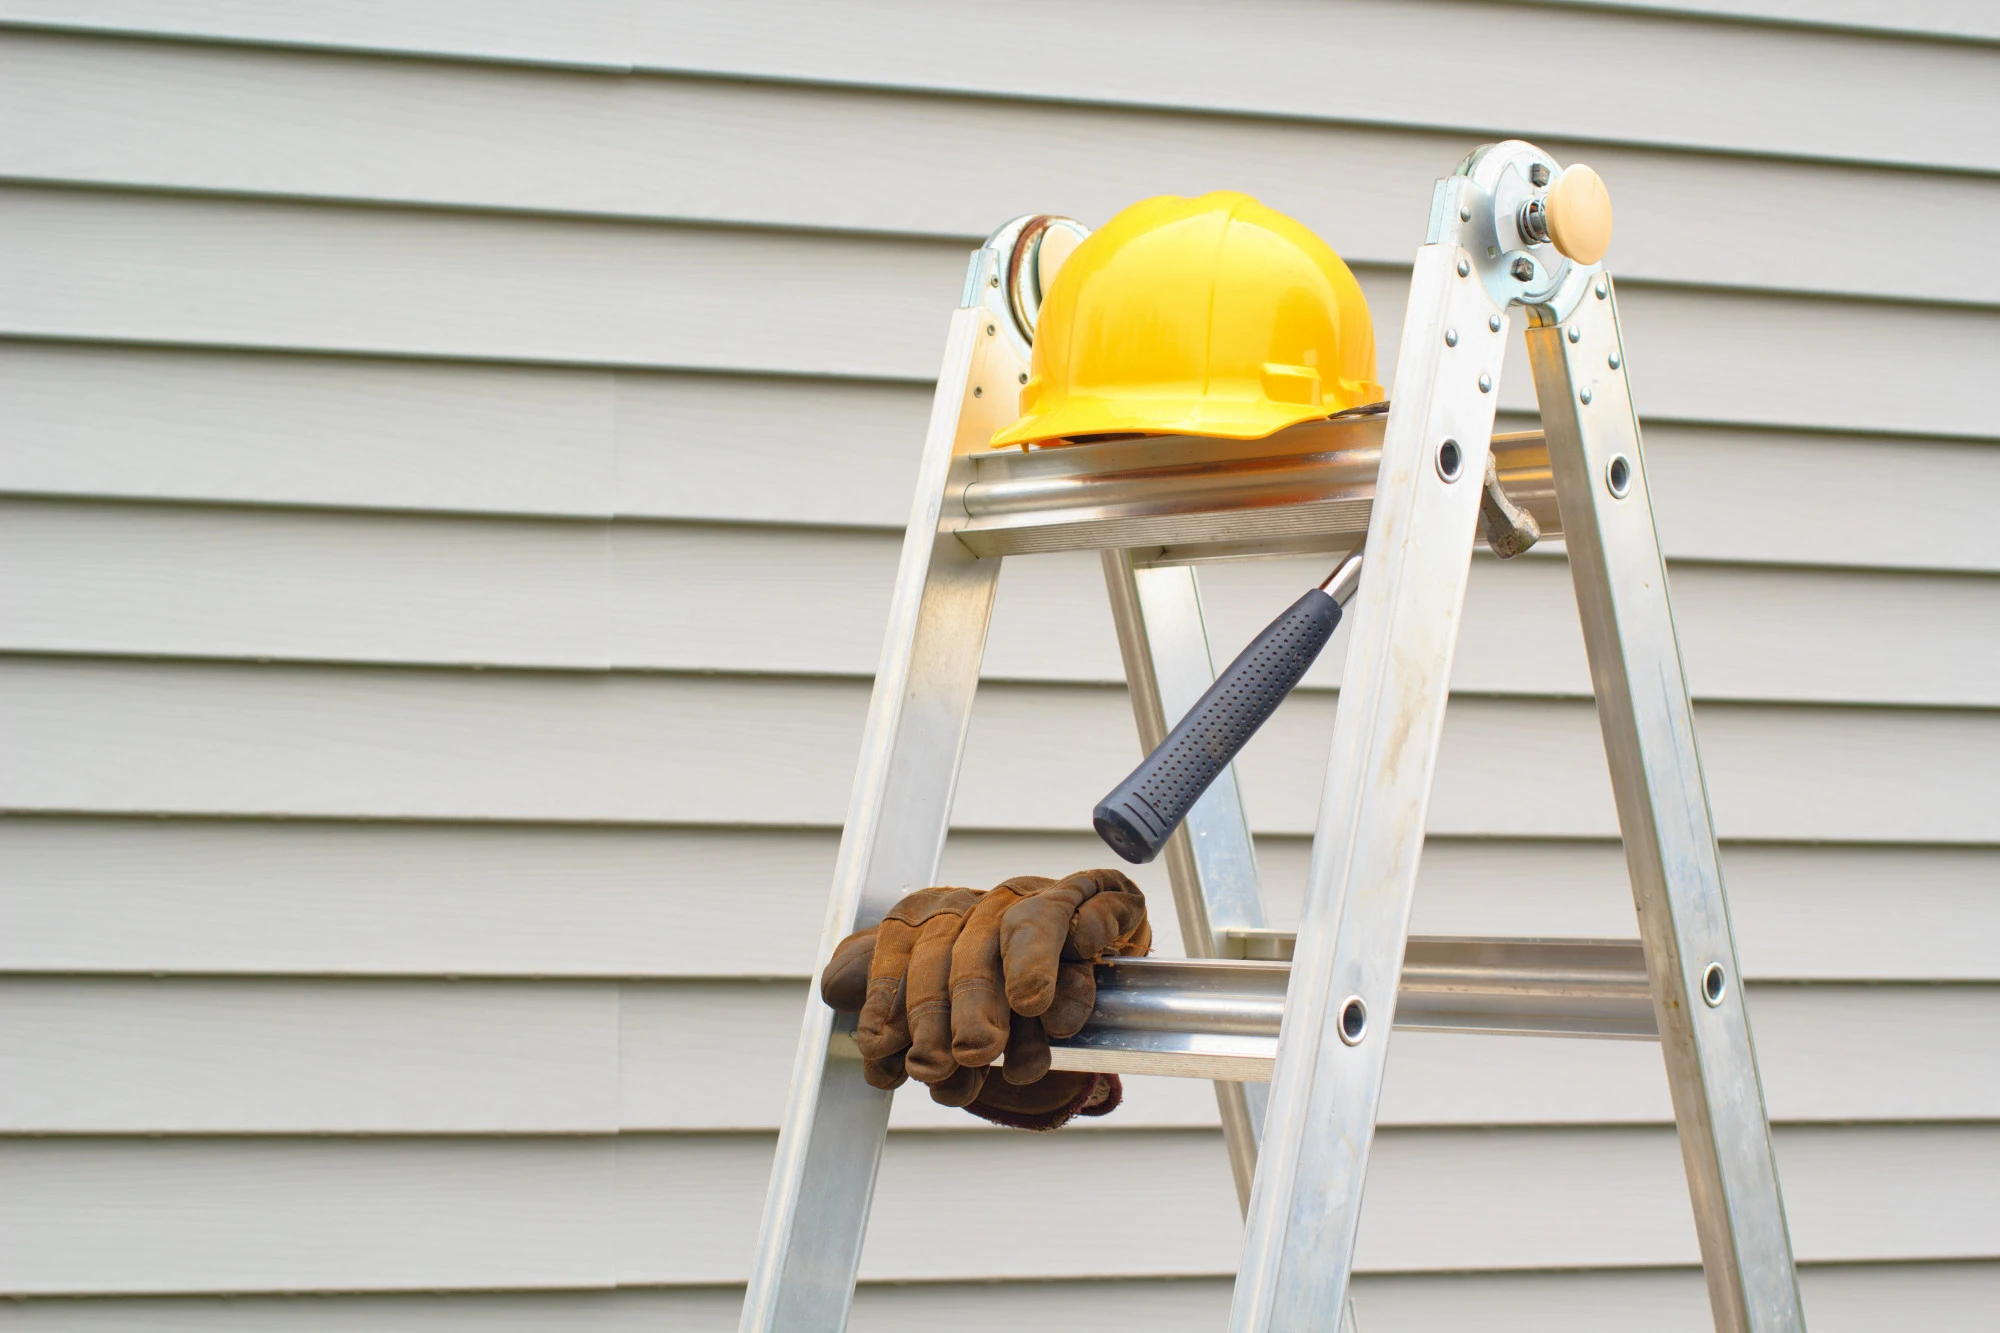 Siding Repair or Siding Replacement - Which Is Better For Your Home